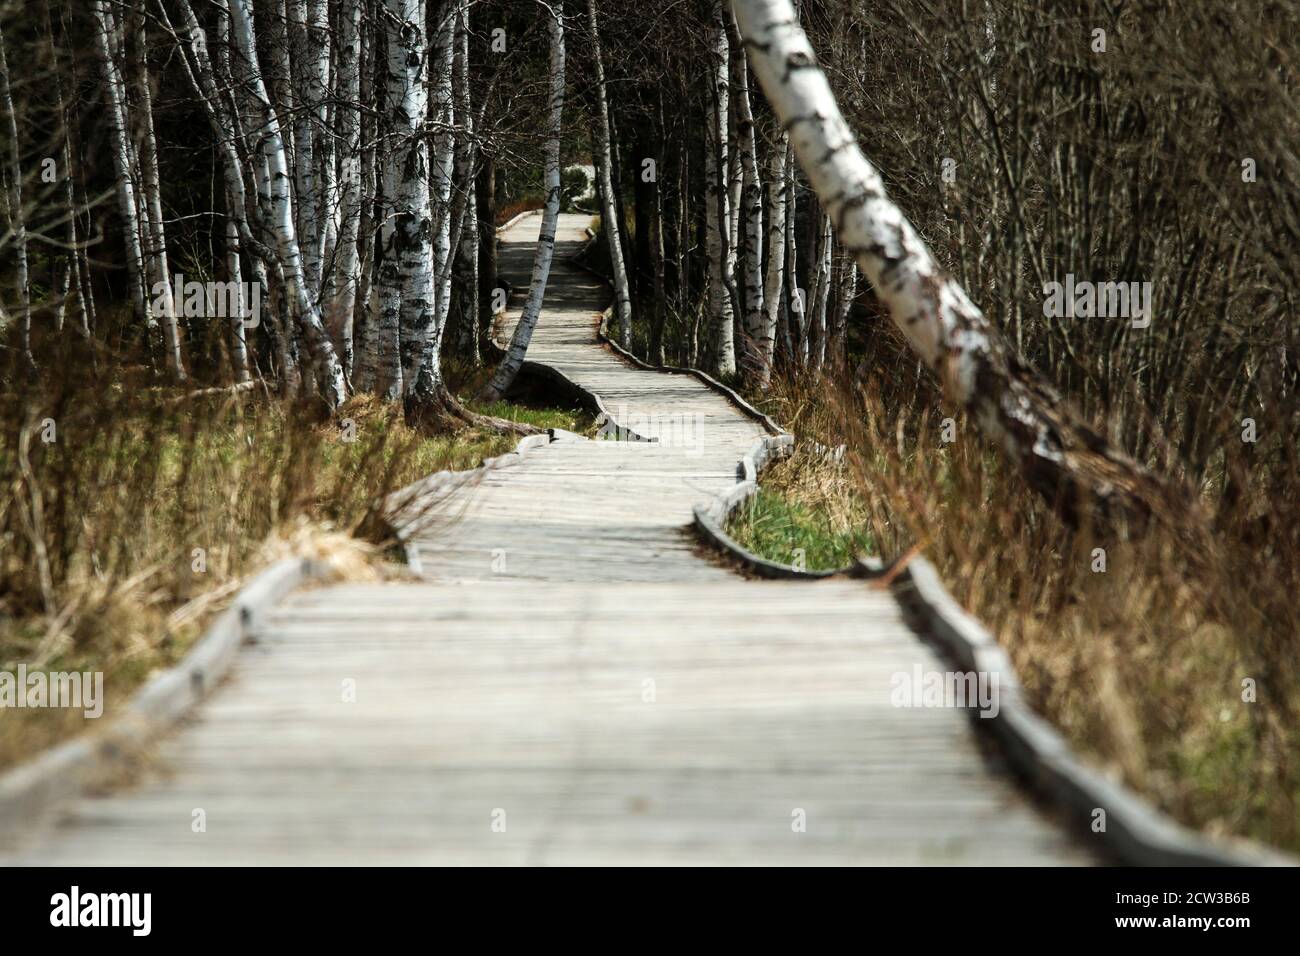 The picture from the protected area in Czech Republic called 'Chalupská slať' (Hut peat bog) at Šumava. The wooden pathways lead over the peat bogs. Stock Photo